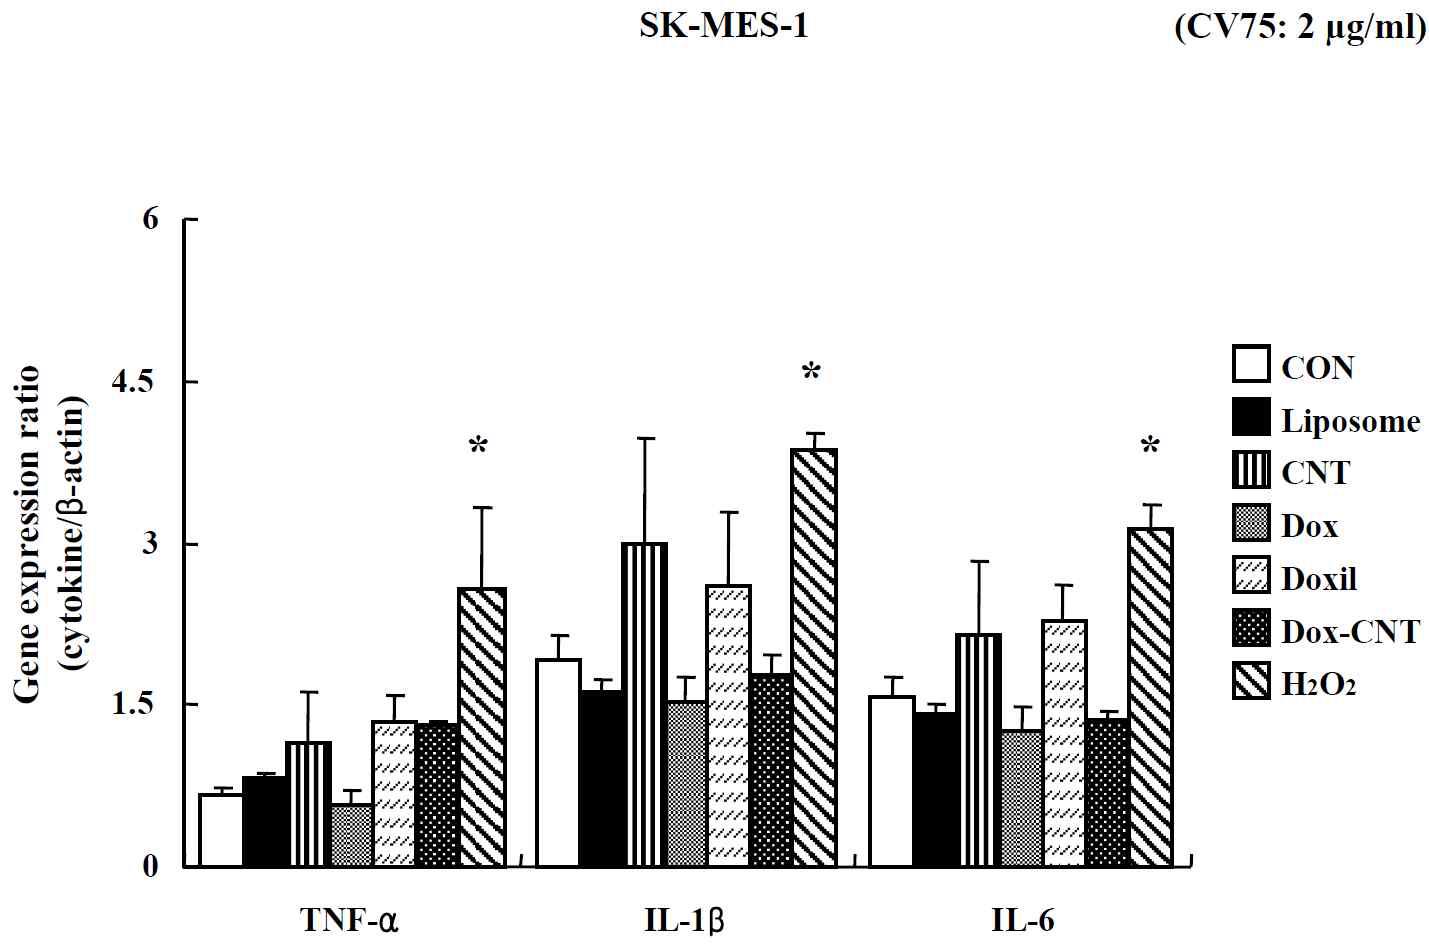 Effects of nano-anticancer drugs on TNF-α, IL-1β, IL-6 gene expression in SK-MES-1 cells. Cells were treated with drugs for 24 hr. Real-time PCR amplification of the housekeeping gene, β-actin, was performed for each sample. Data are shown as means ± SE (n = 3). * p<0.05, significantly different from the control.